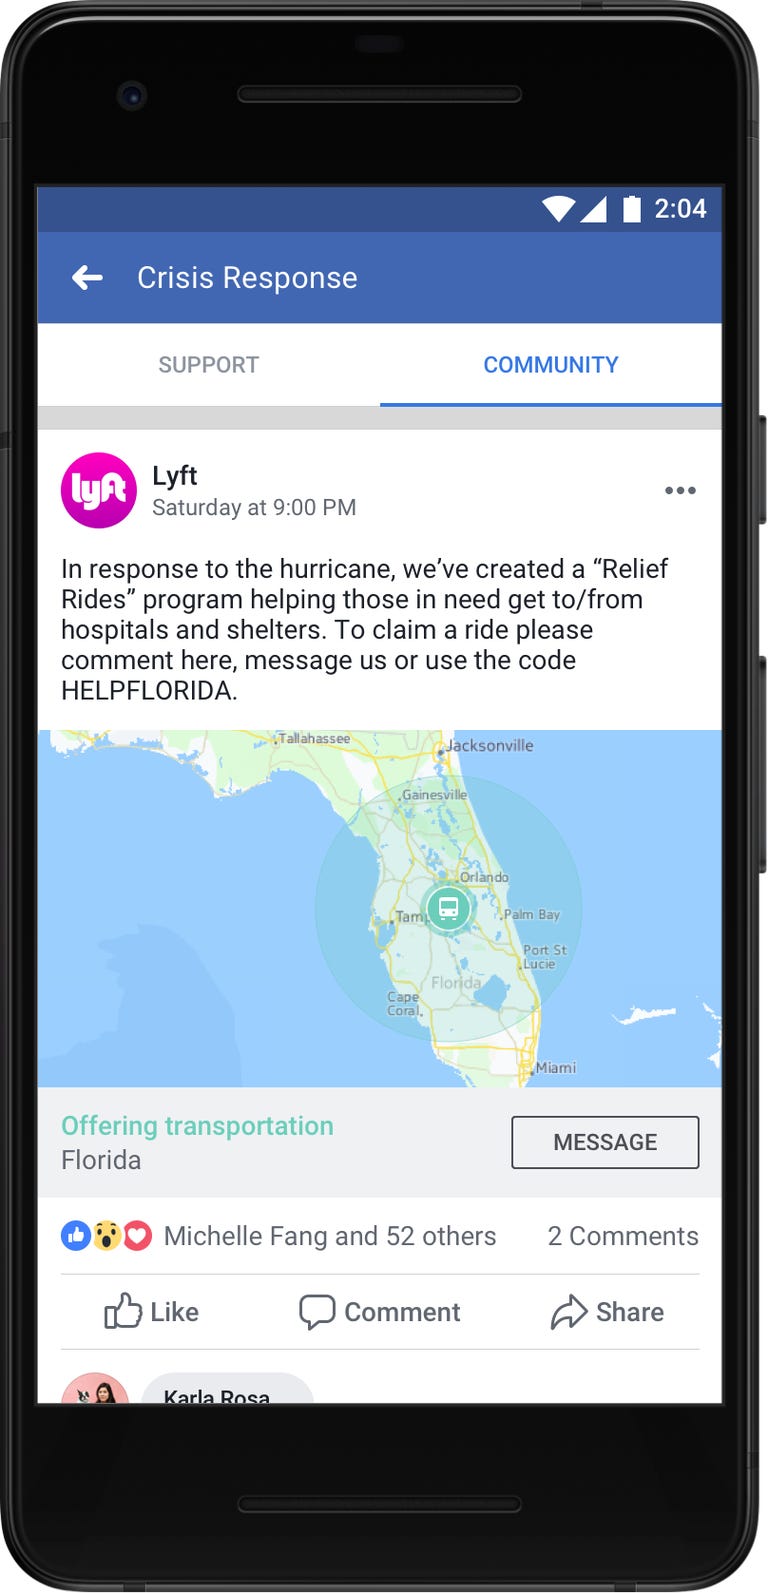 During a crisis, companies like Lyft can use Community Help to assist people in finding free transportation or other services. 